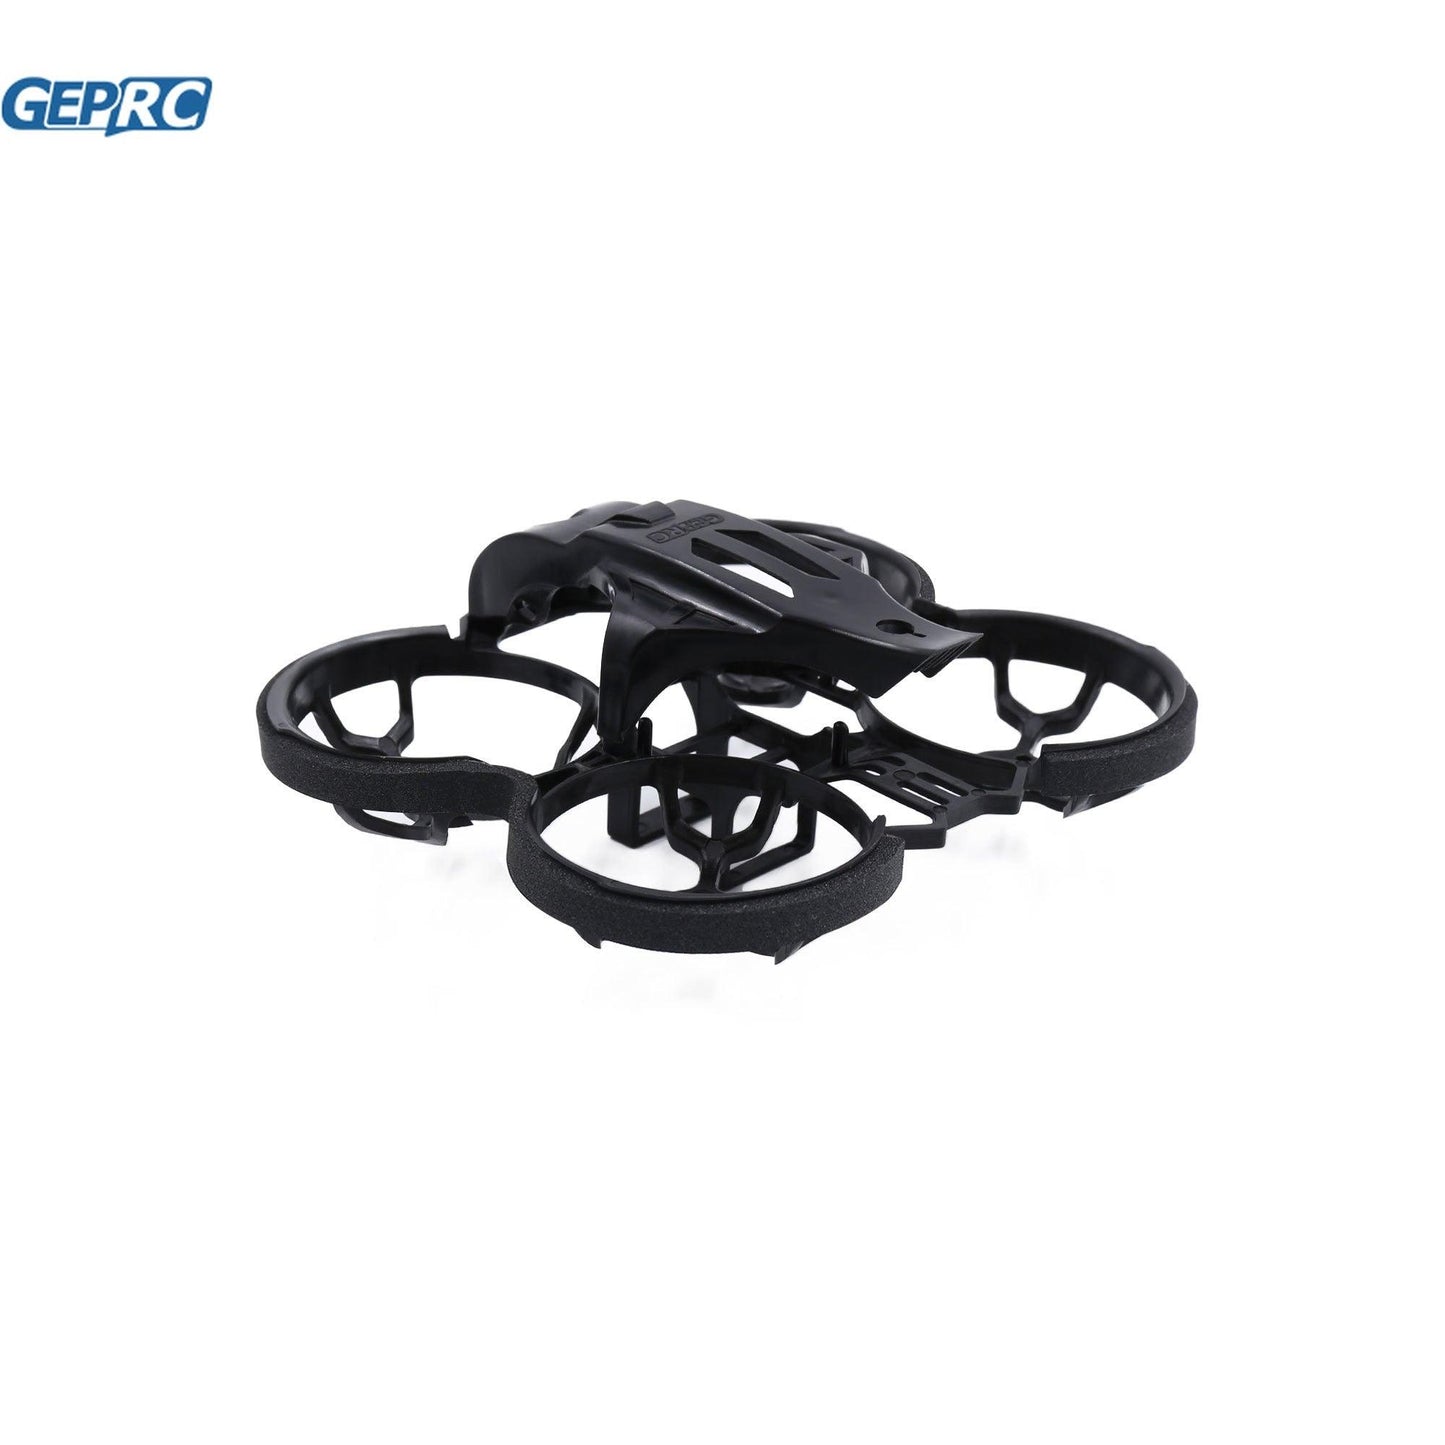 GEPRC GEP-TG FPV Frame Kit Suitable For Tinygo Series Drone RC DIY FPV Quadcopter Drone Replacement Accessories Parts - RCDrone